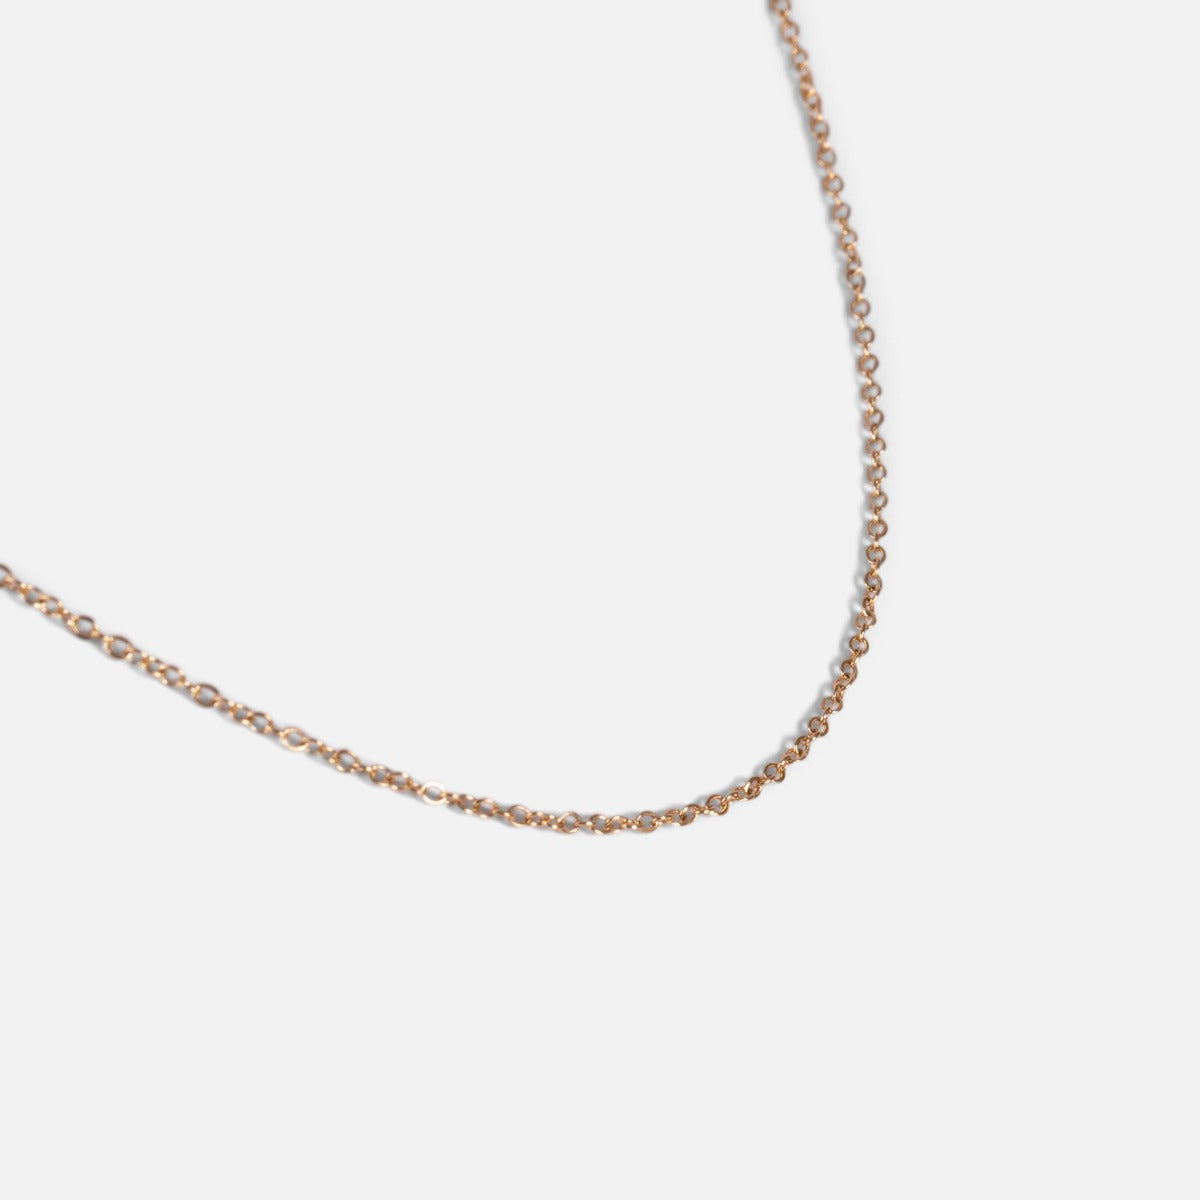 Thin golden stainless steel chain (22’’)